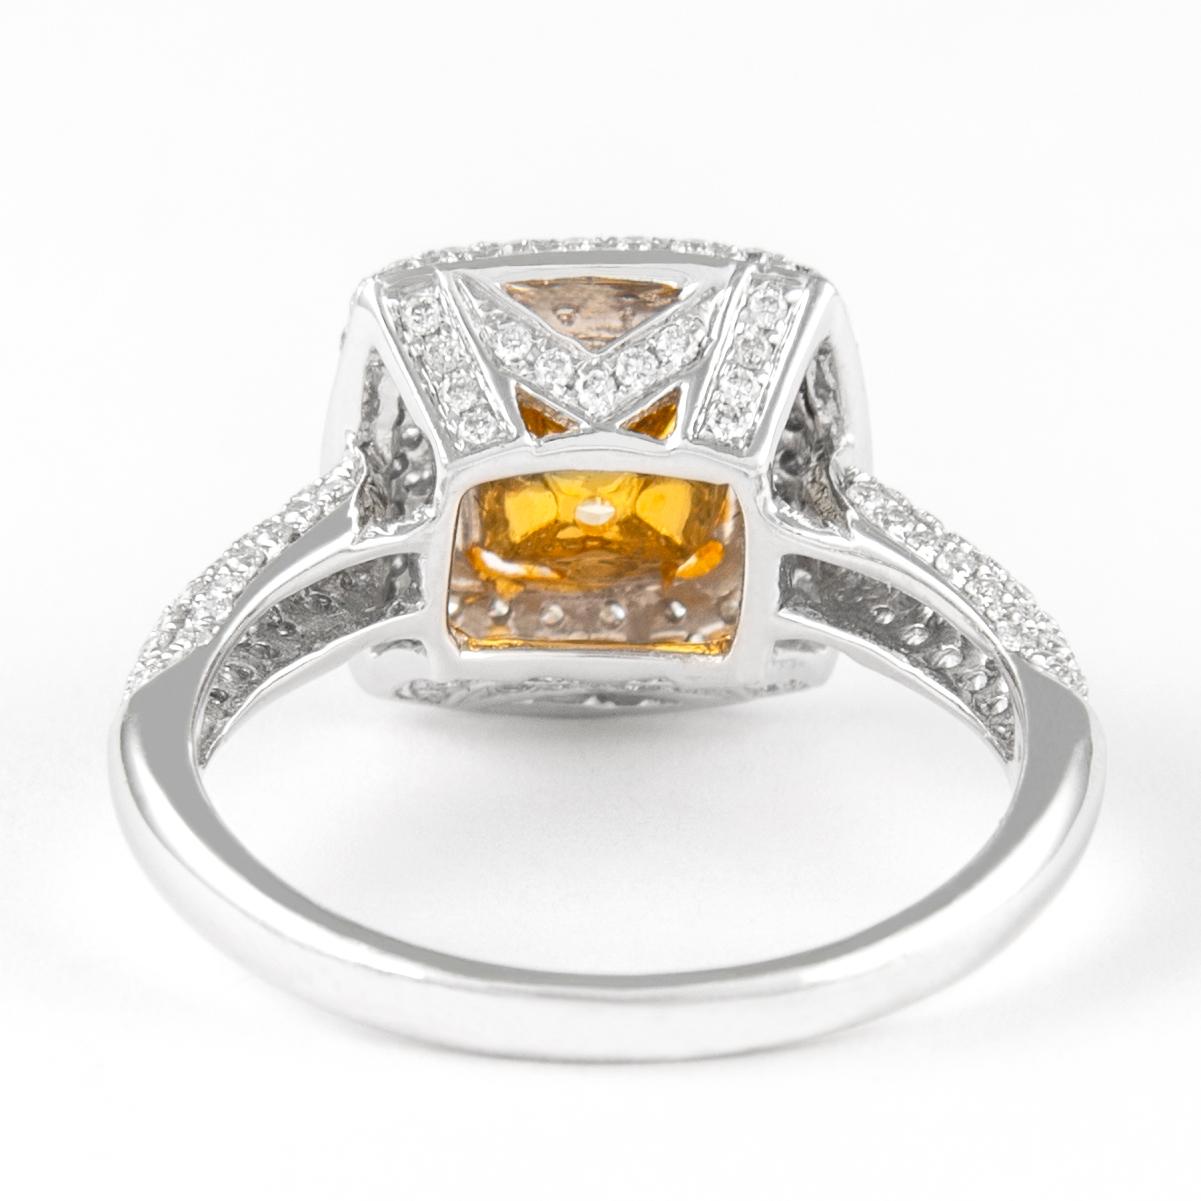 Alexander 1.51ct Fancy Intense Yellow VS2 Radiant Diamond with Halo Ring 18k In New Condition For Sale In BEVERLY HILLS, CA